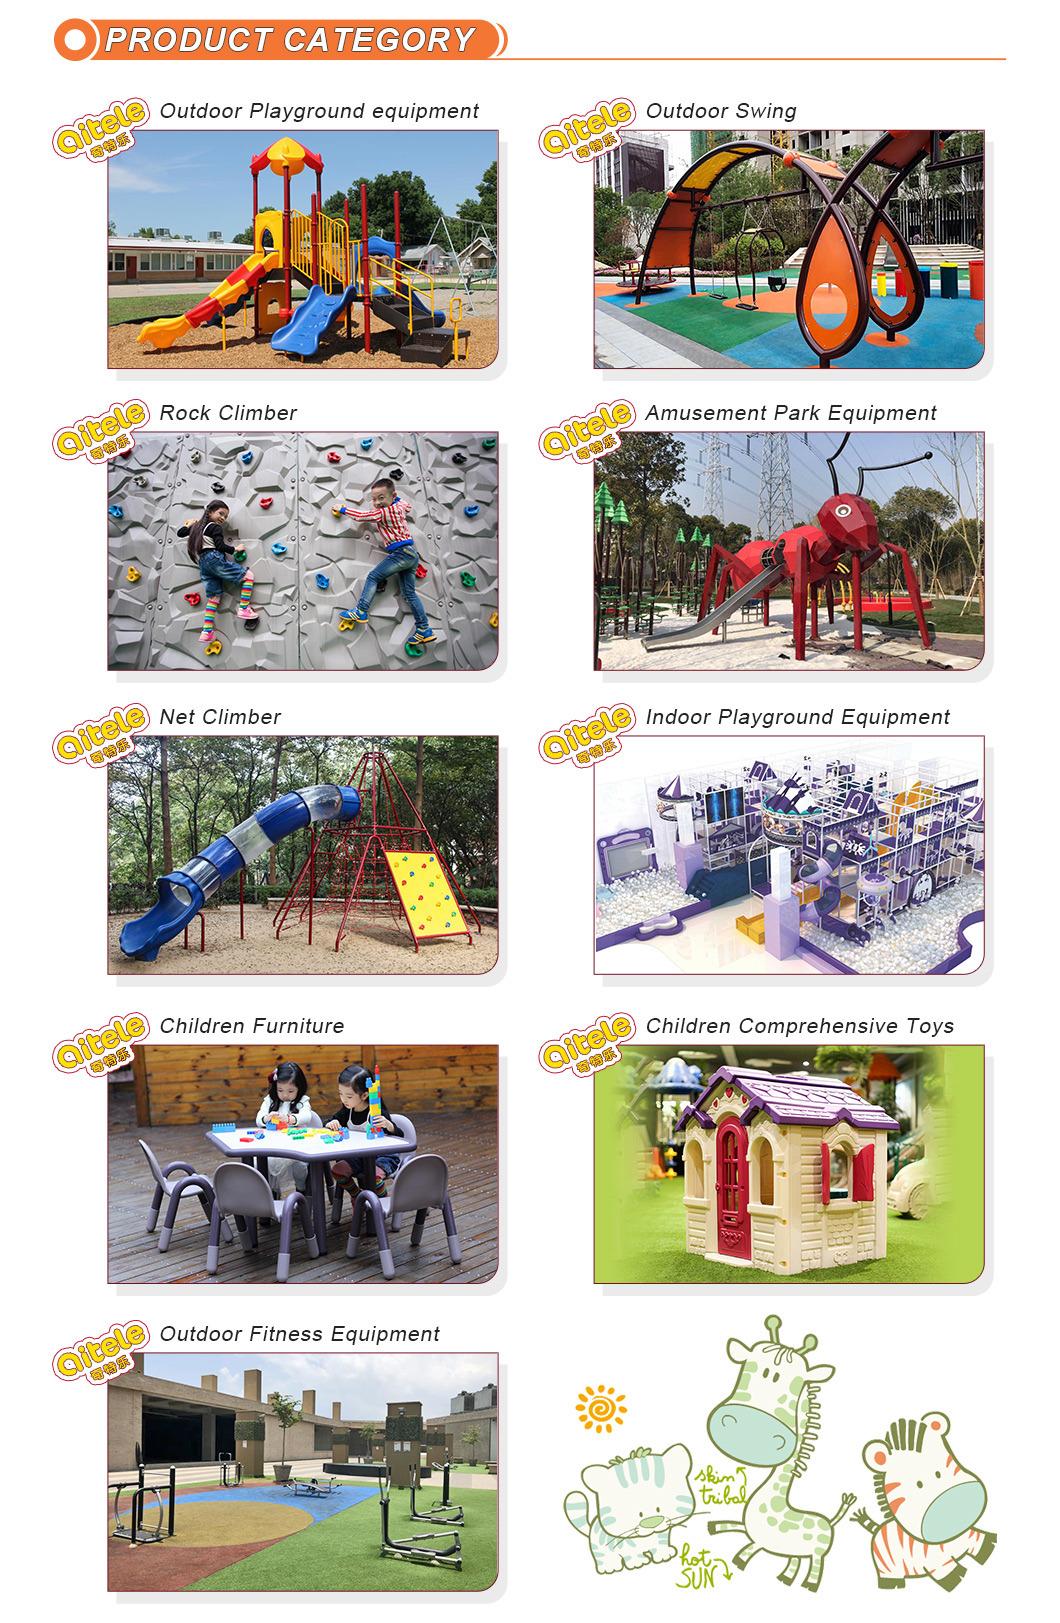 Qitele Special Design Outdoor Playground Equipment for Disable Kids